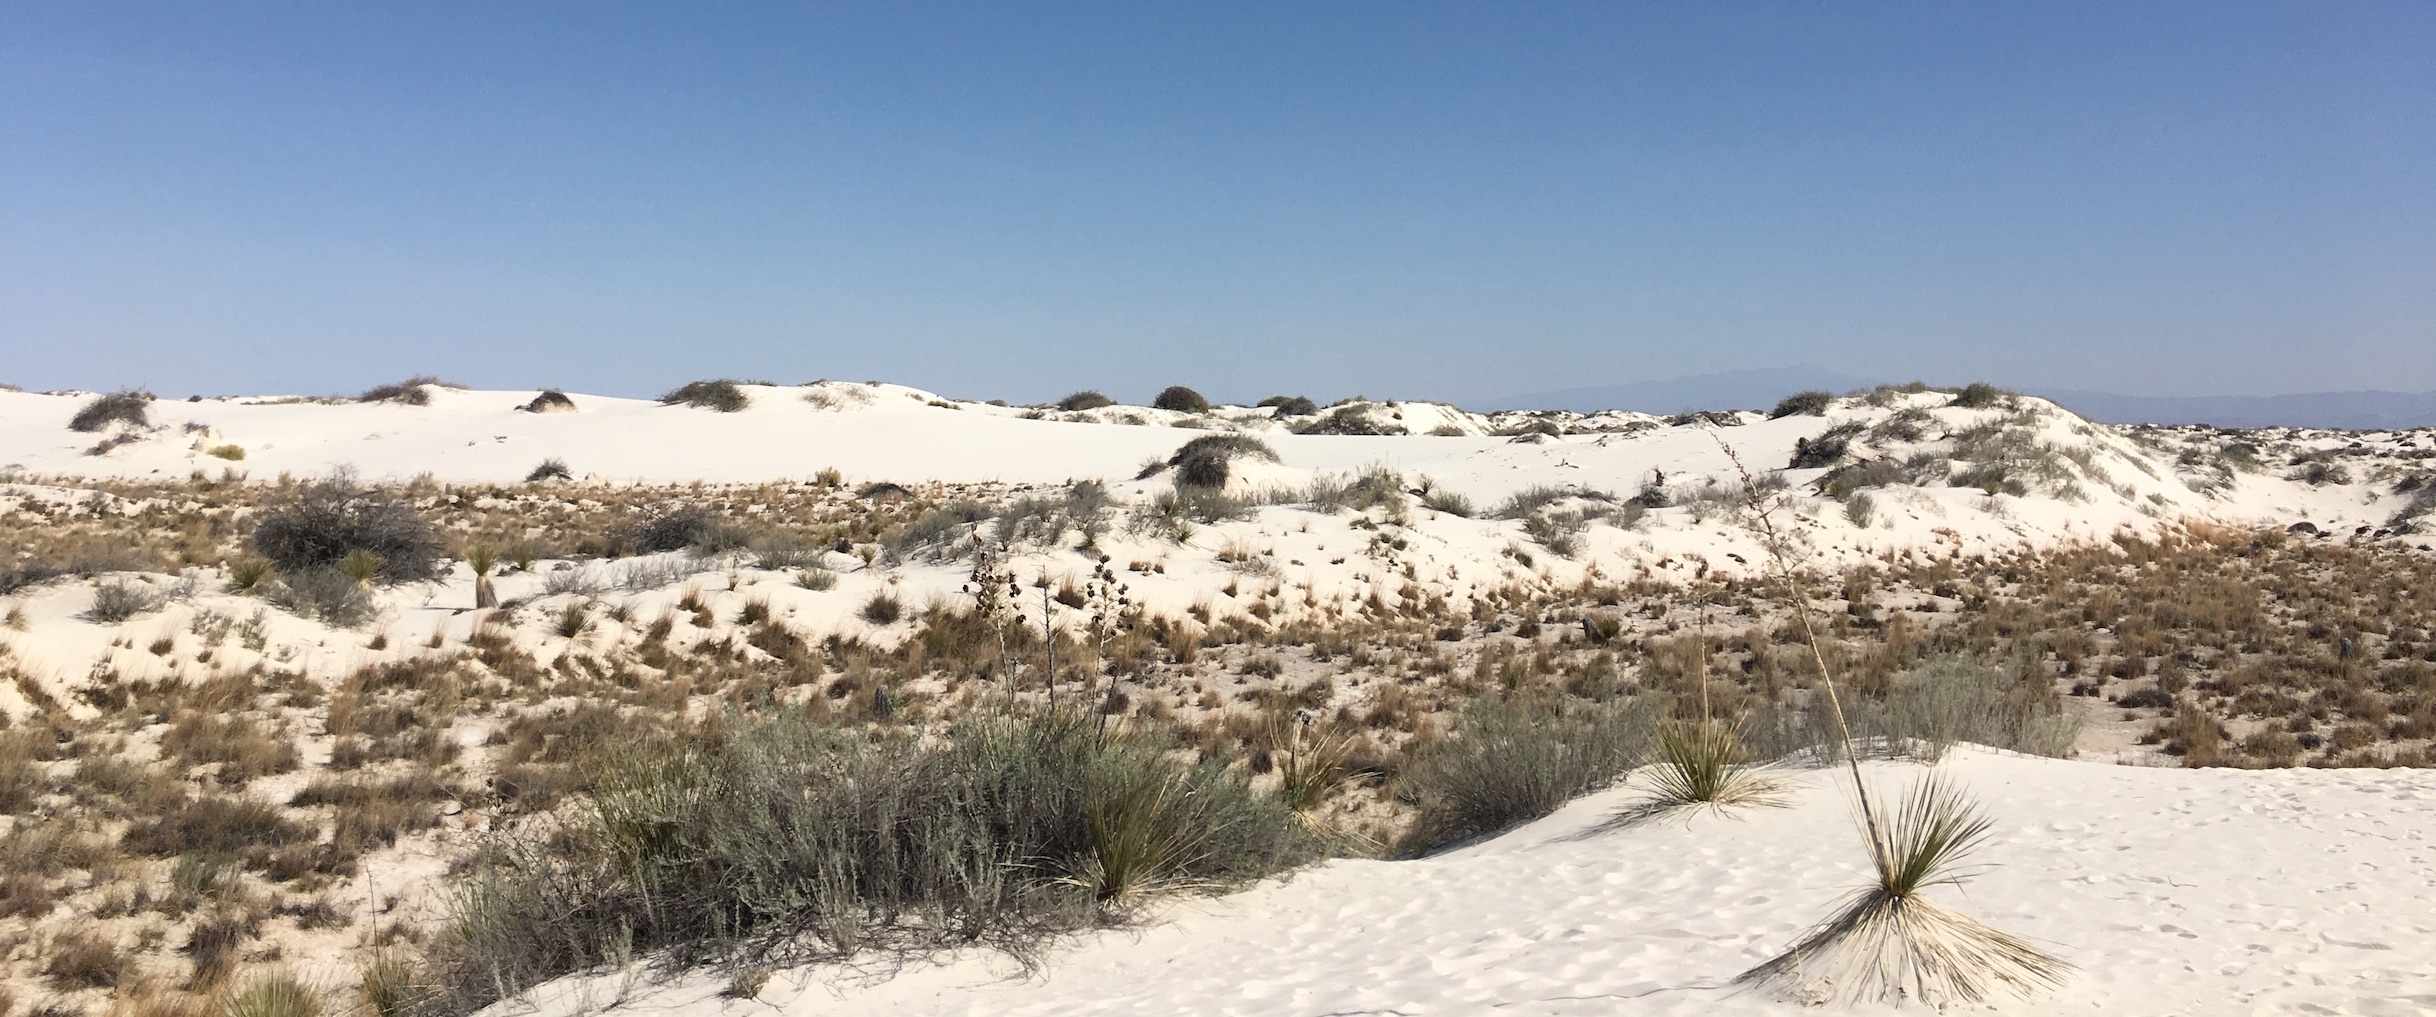 A Visit to White Sands National Monument